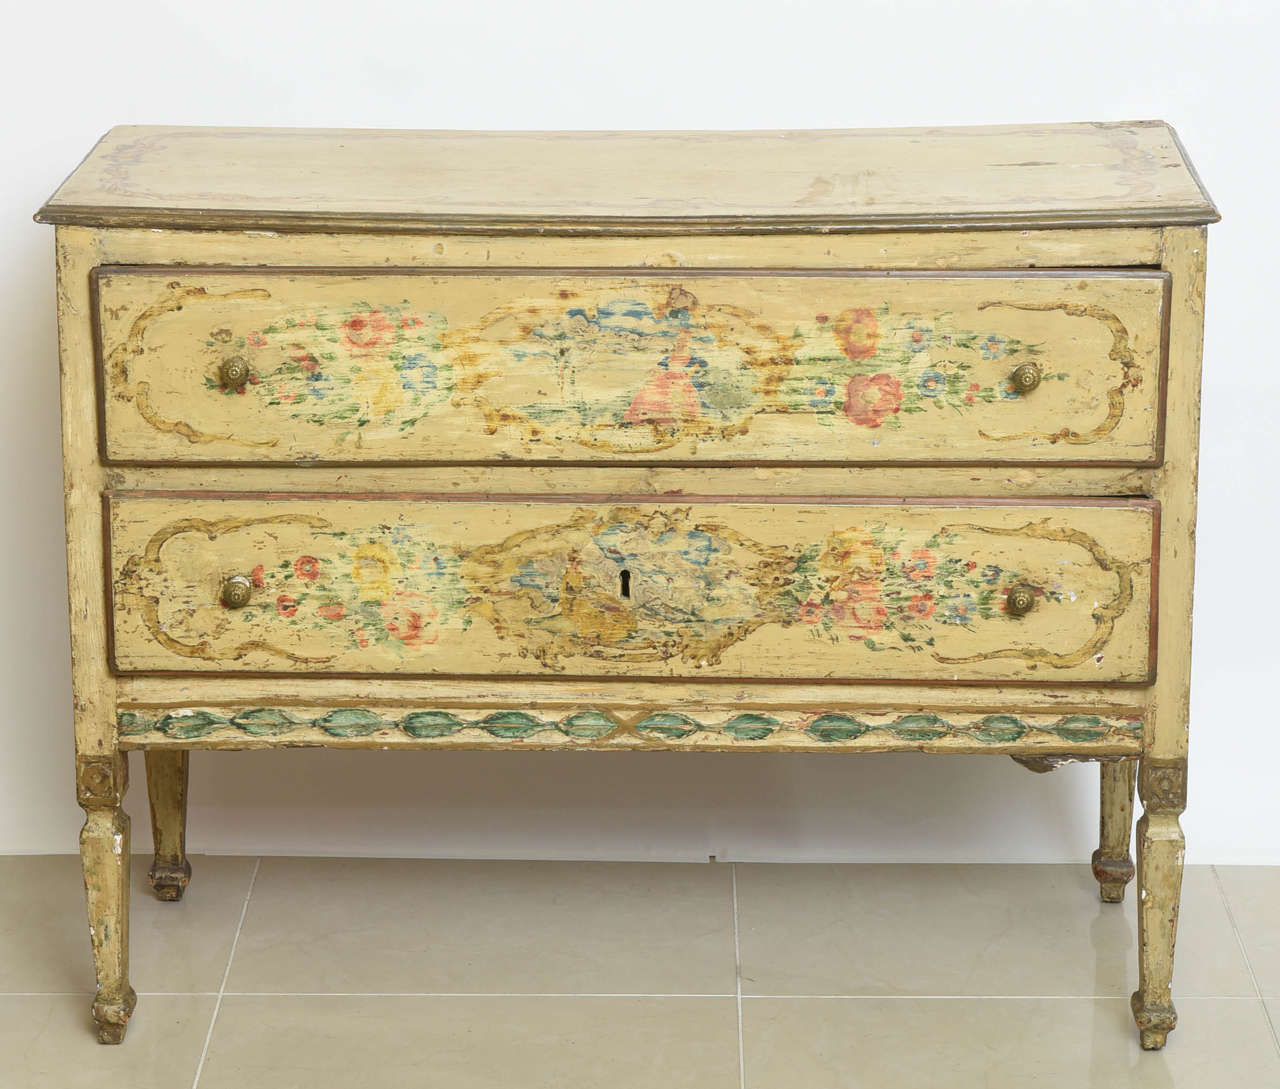 The rectangular top above two drawers and paneled sides above square tapering legs, overall painted in a pale yellow ground with floral and figural scenes, original paint not refreshed.